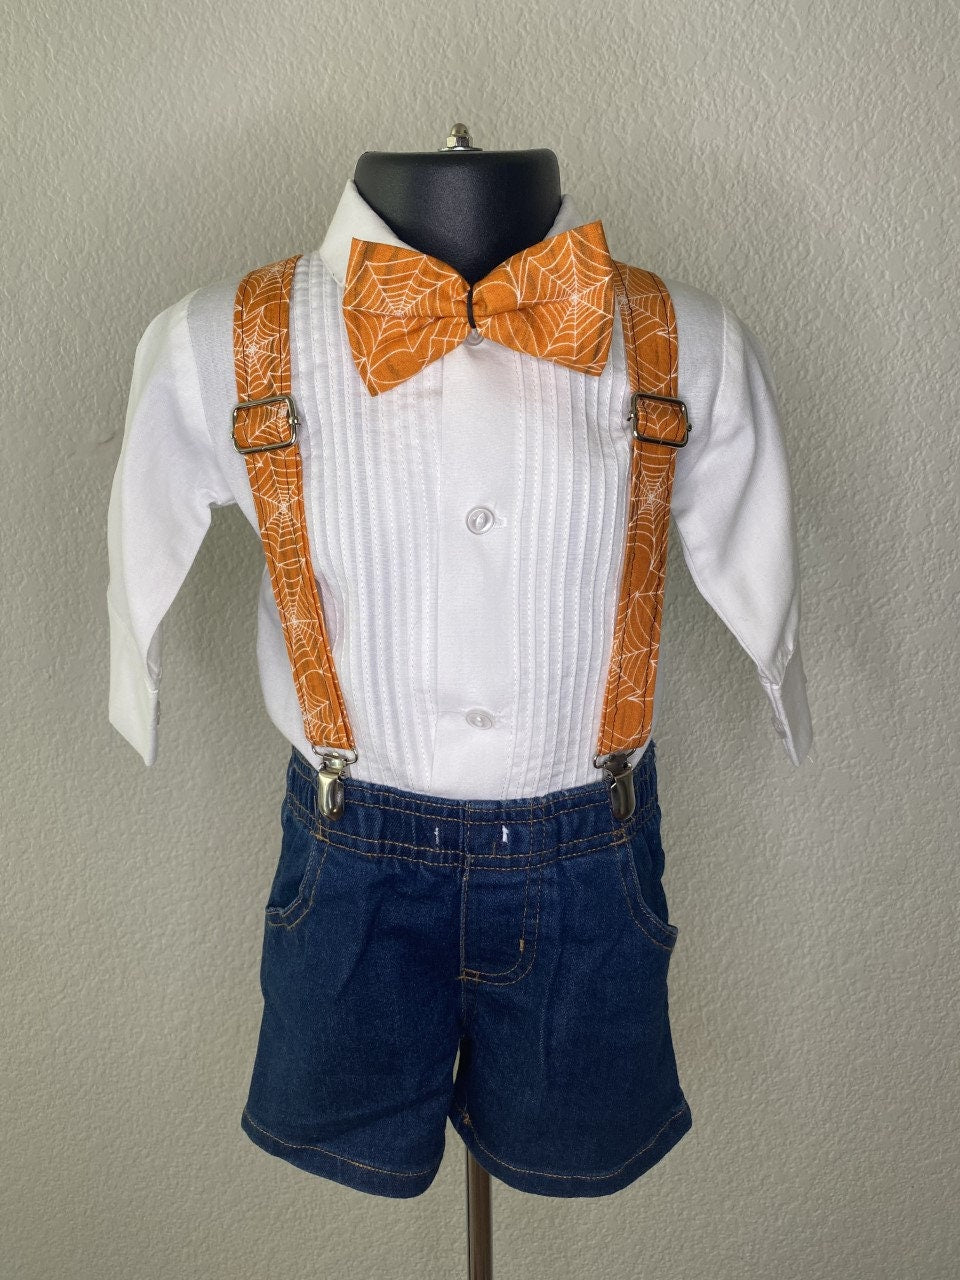 Halloween Orange Spiderweb suspenders and bow tie / Infant, Toddler, Child, Teen, Adult, Big & Tall